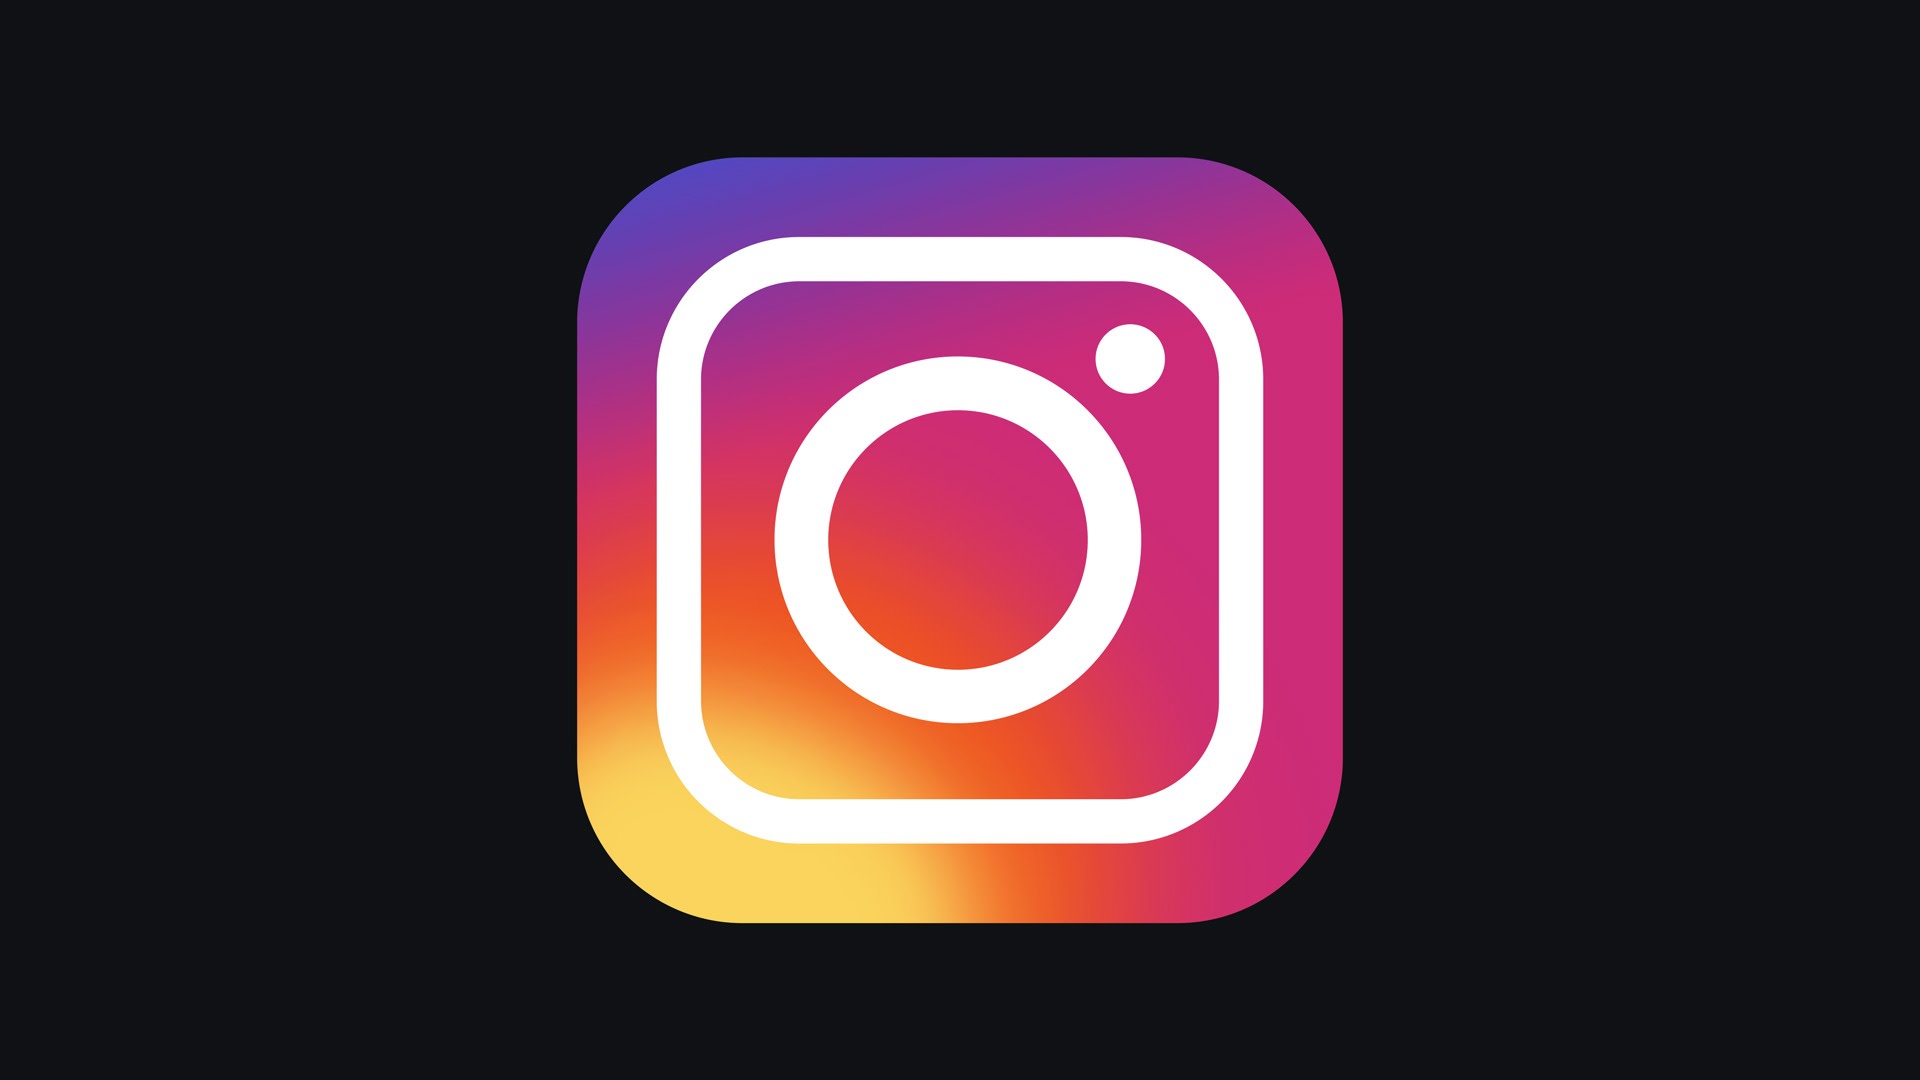 Instagram New Icon 2016 Stock Images, Royalty-Free Images 